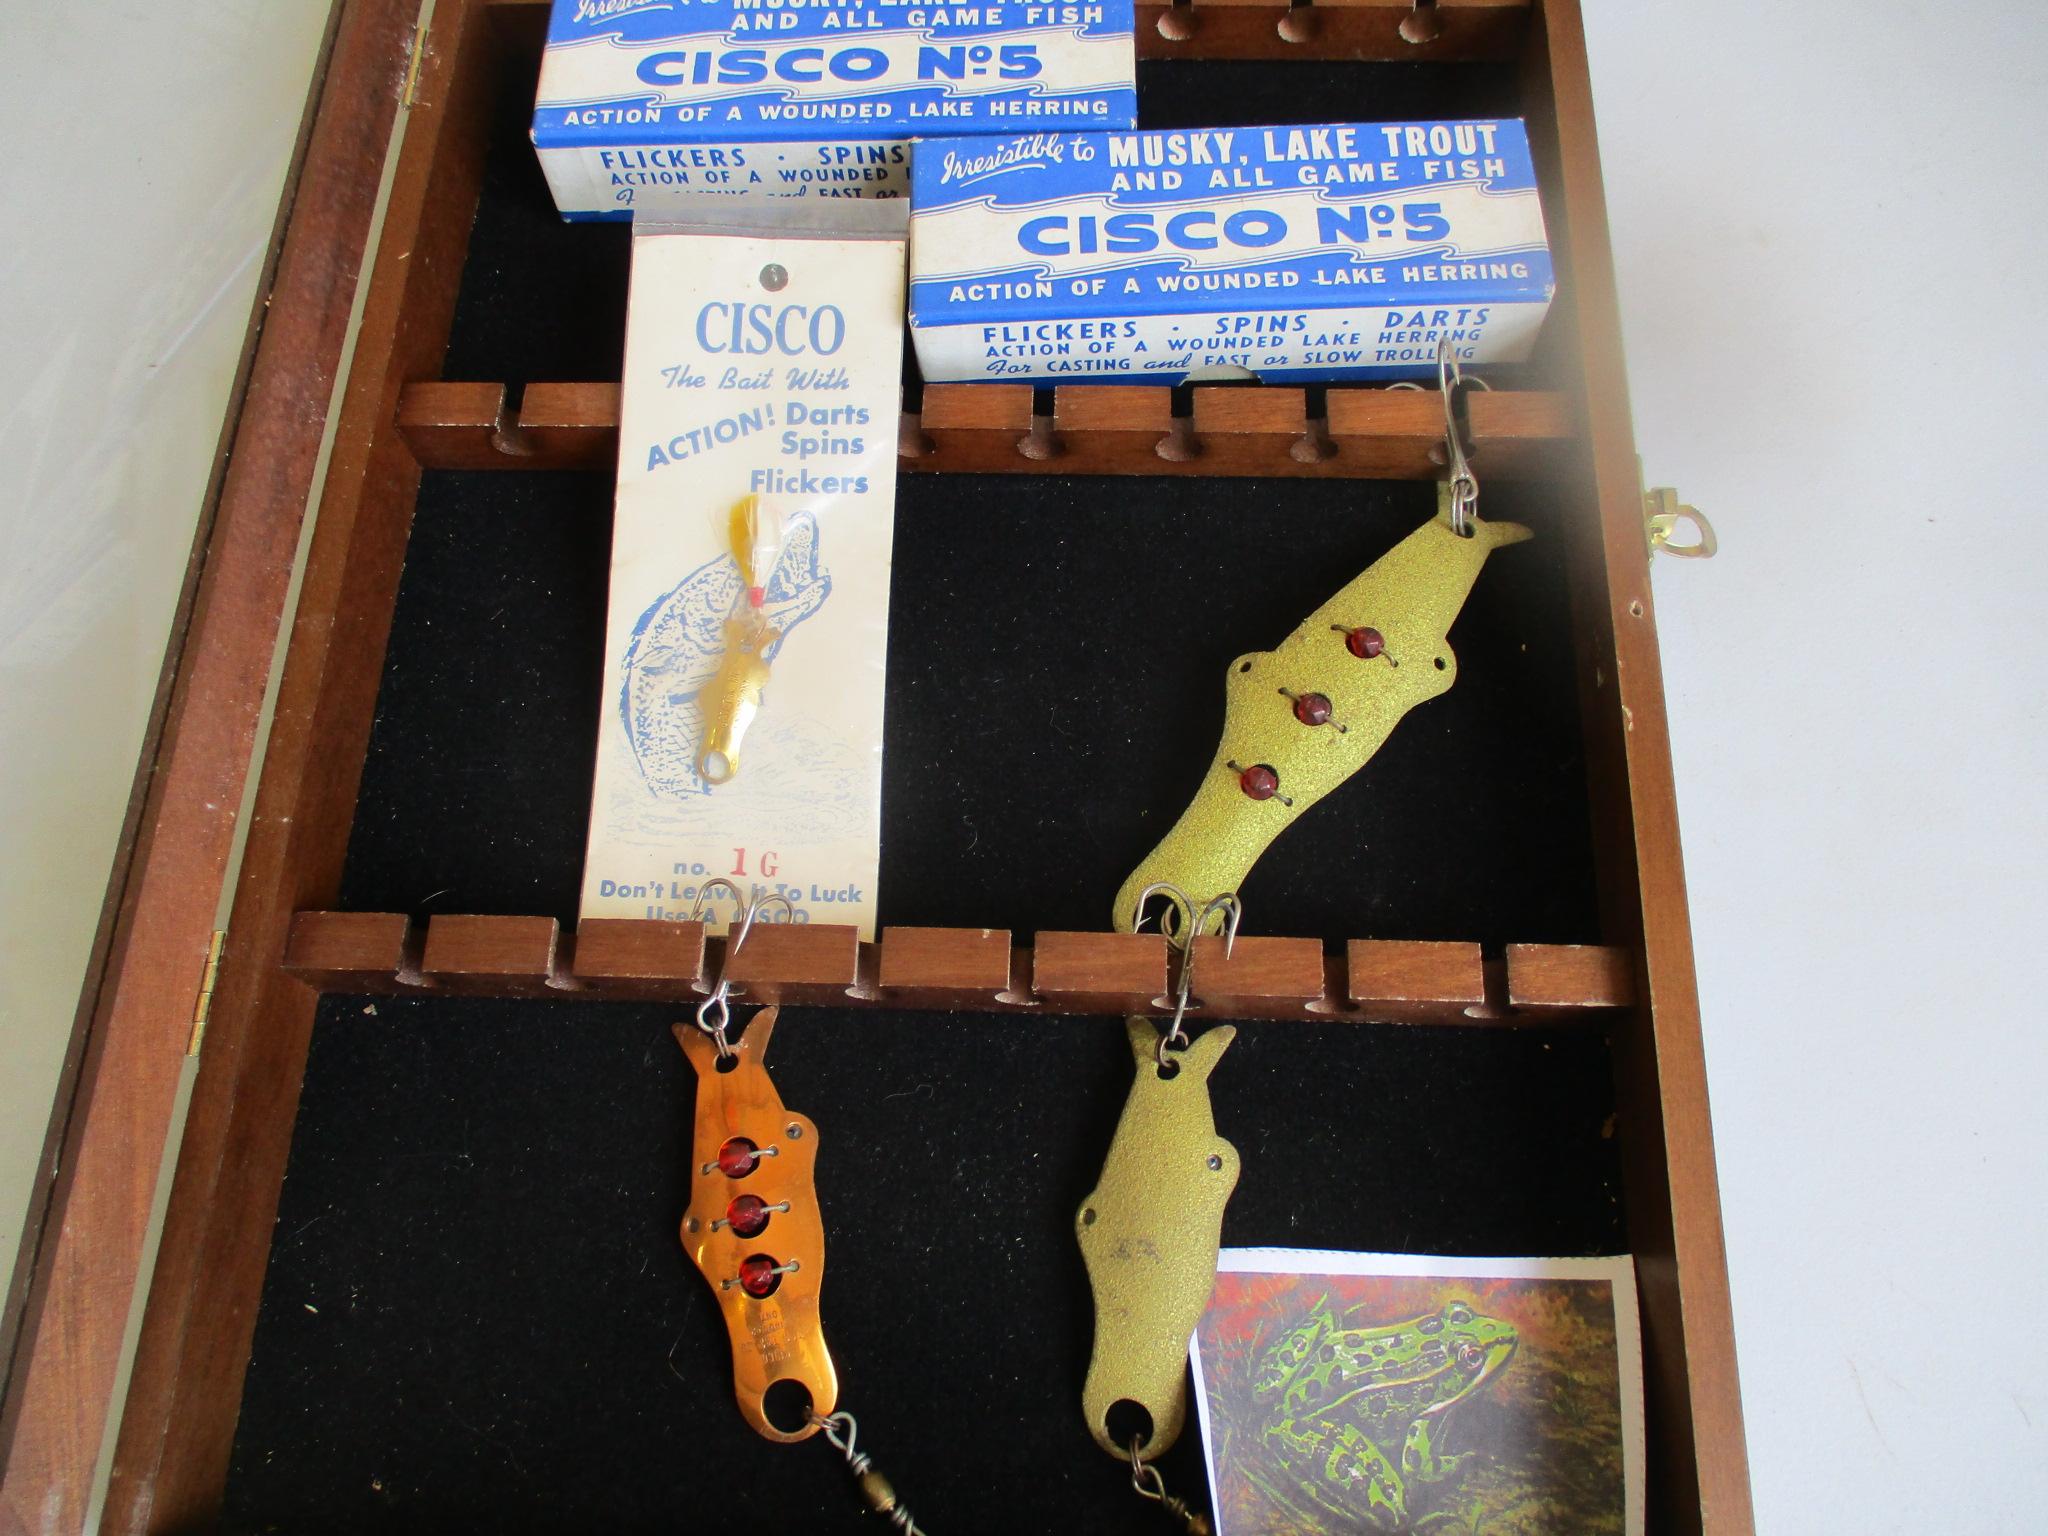 Cisco musky, lake trout lures & original boxes in display casel